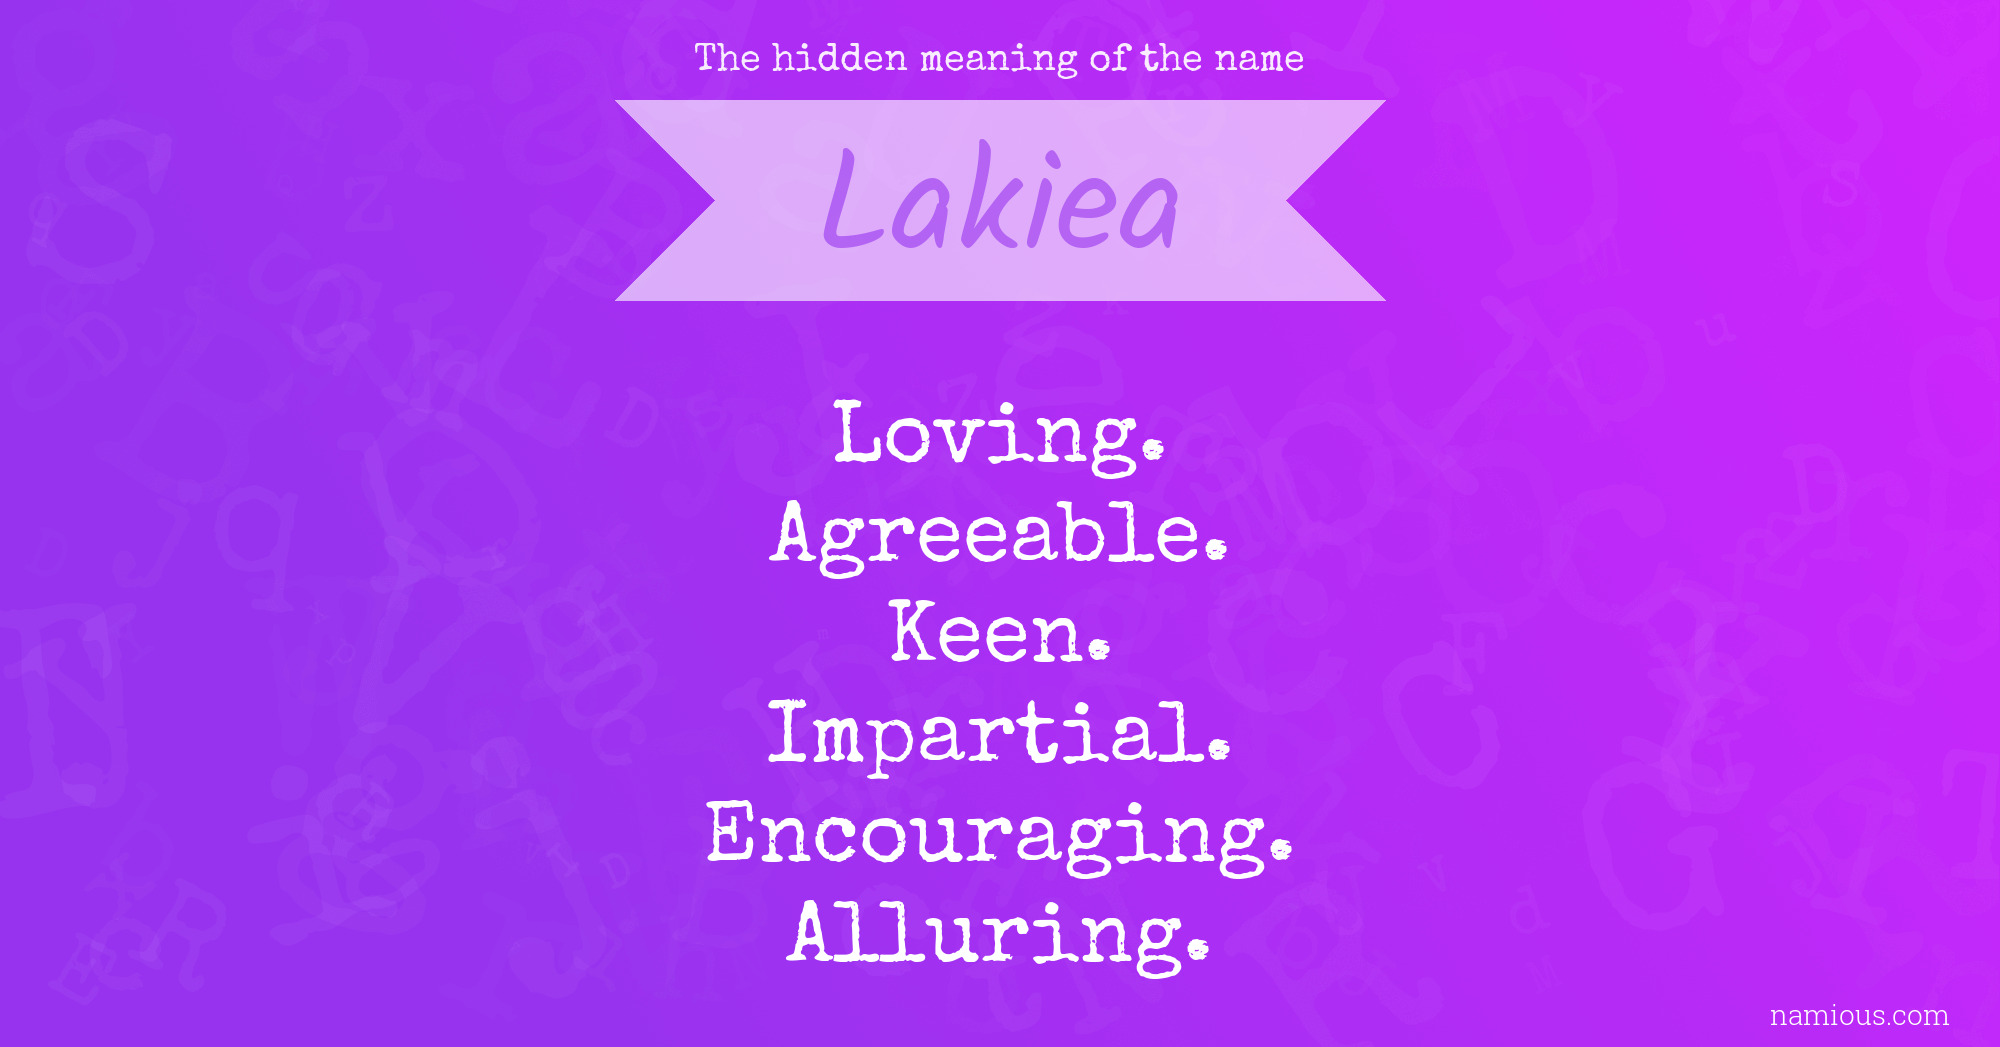 The hidden meaning of the name Lakiea